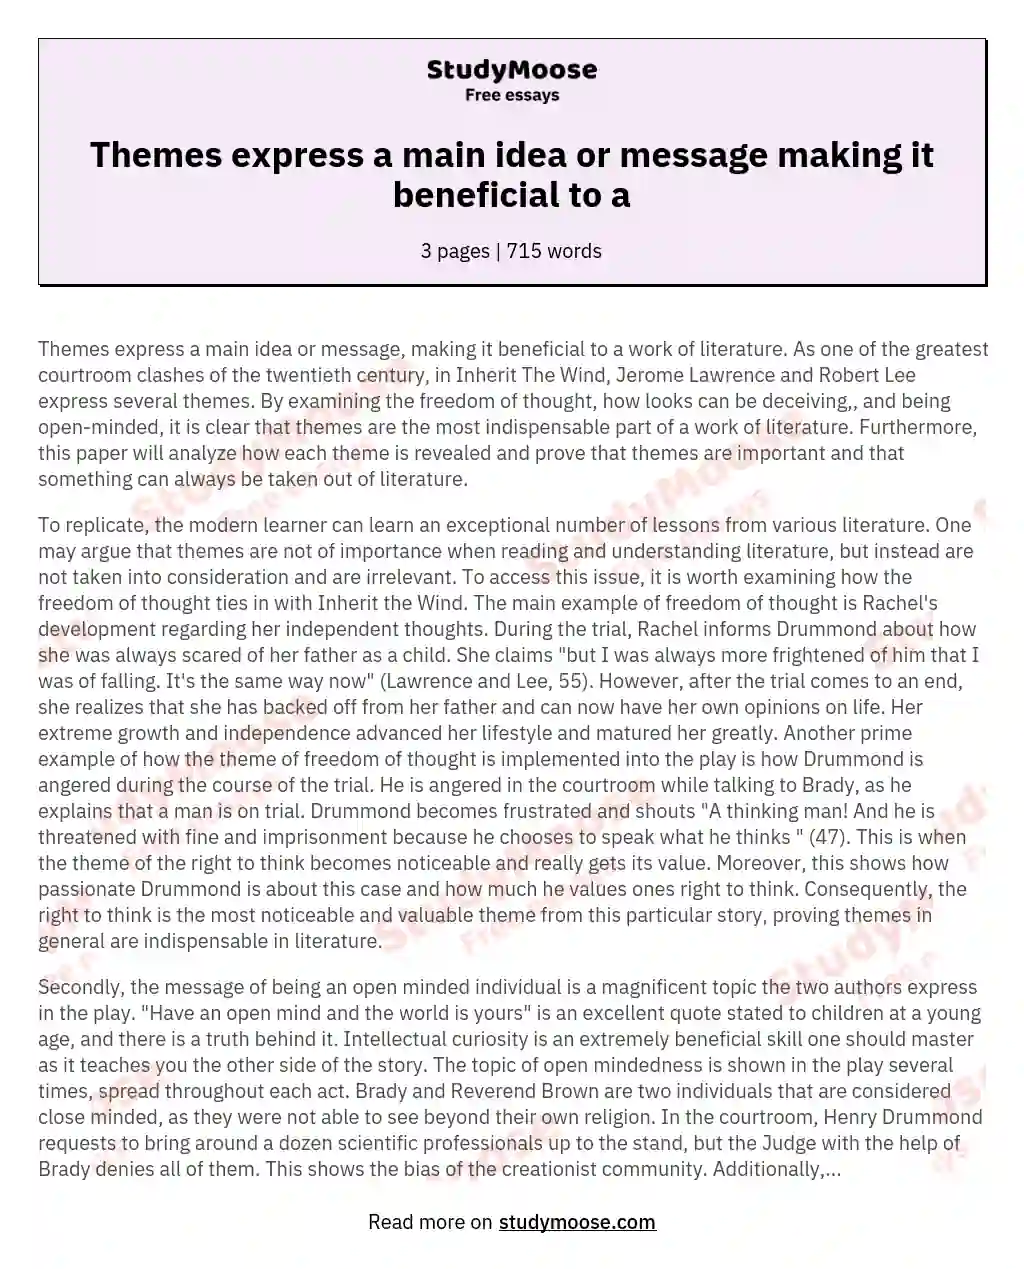 Themes express a main idea or message making it beneficial to a essay